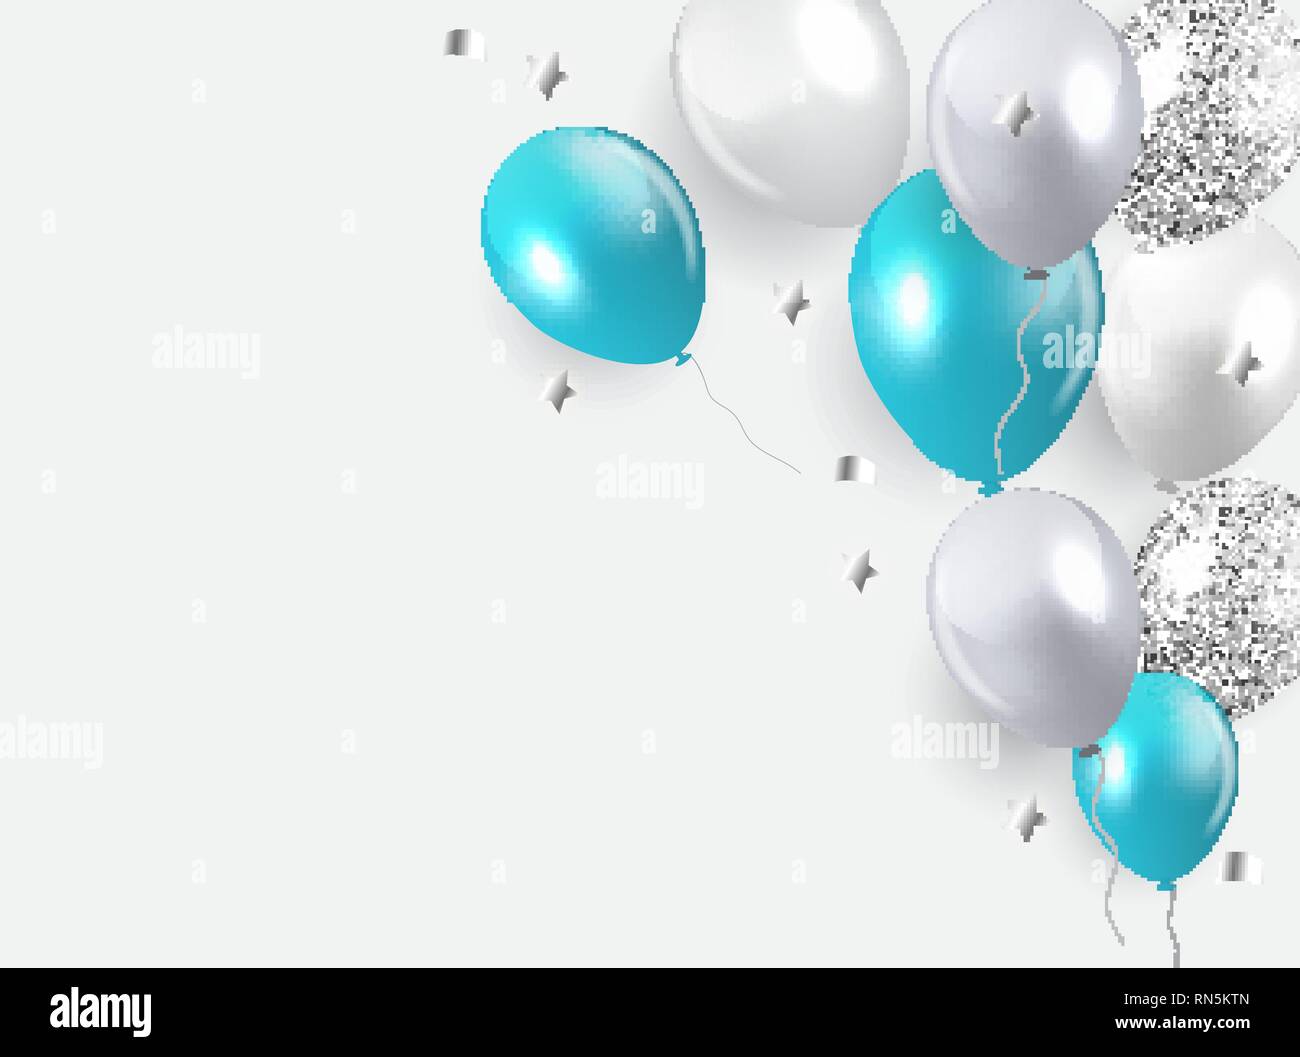 Download Glossy Happy Birthday Balloons Background Vector ...